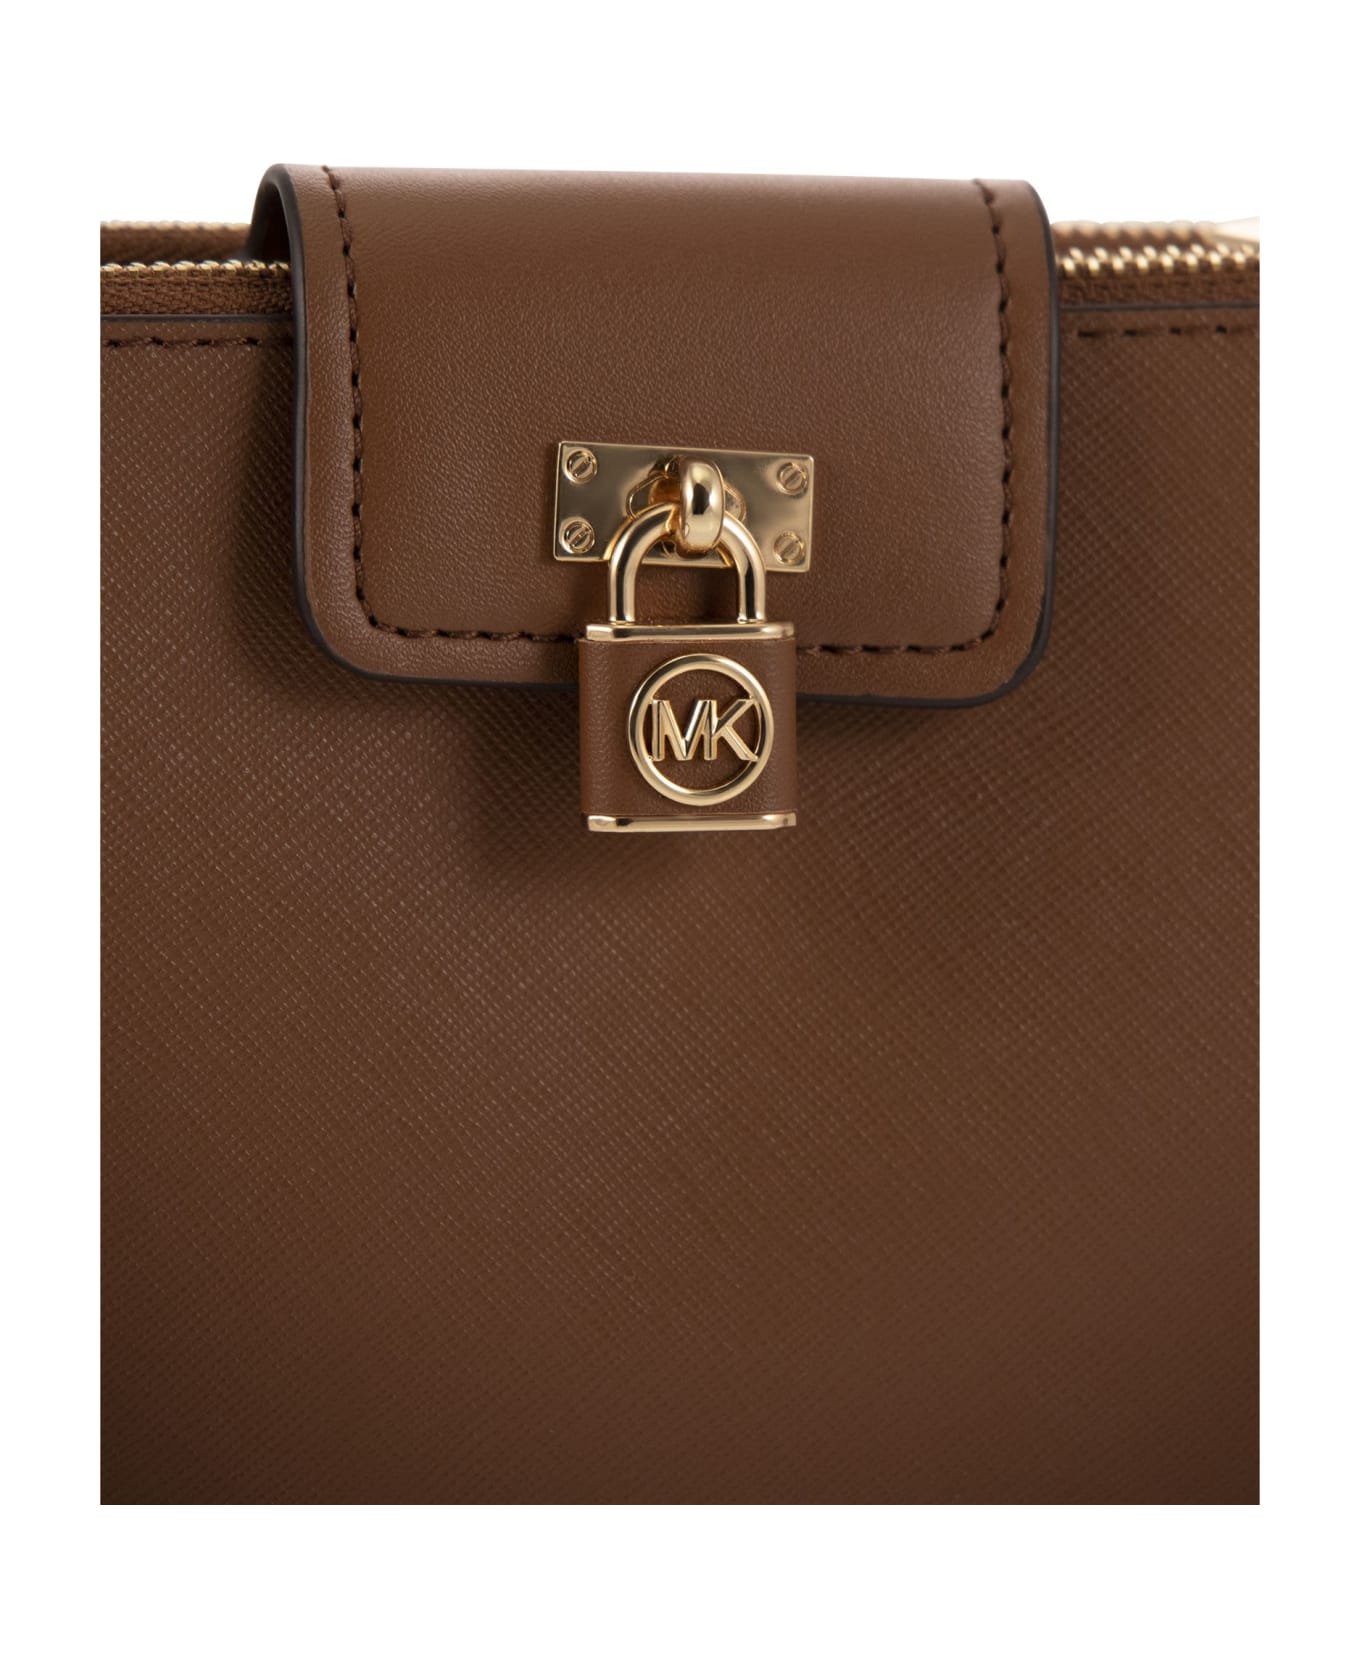 Michael Kors Ruby Bag In Saffiano Leather - Brown ショルダーバッグ